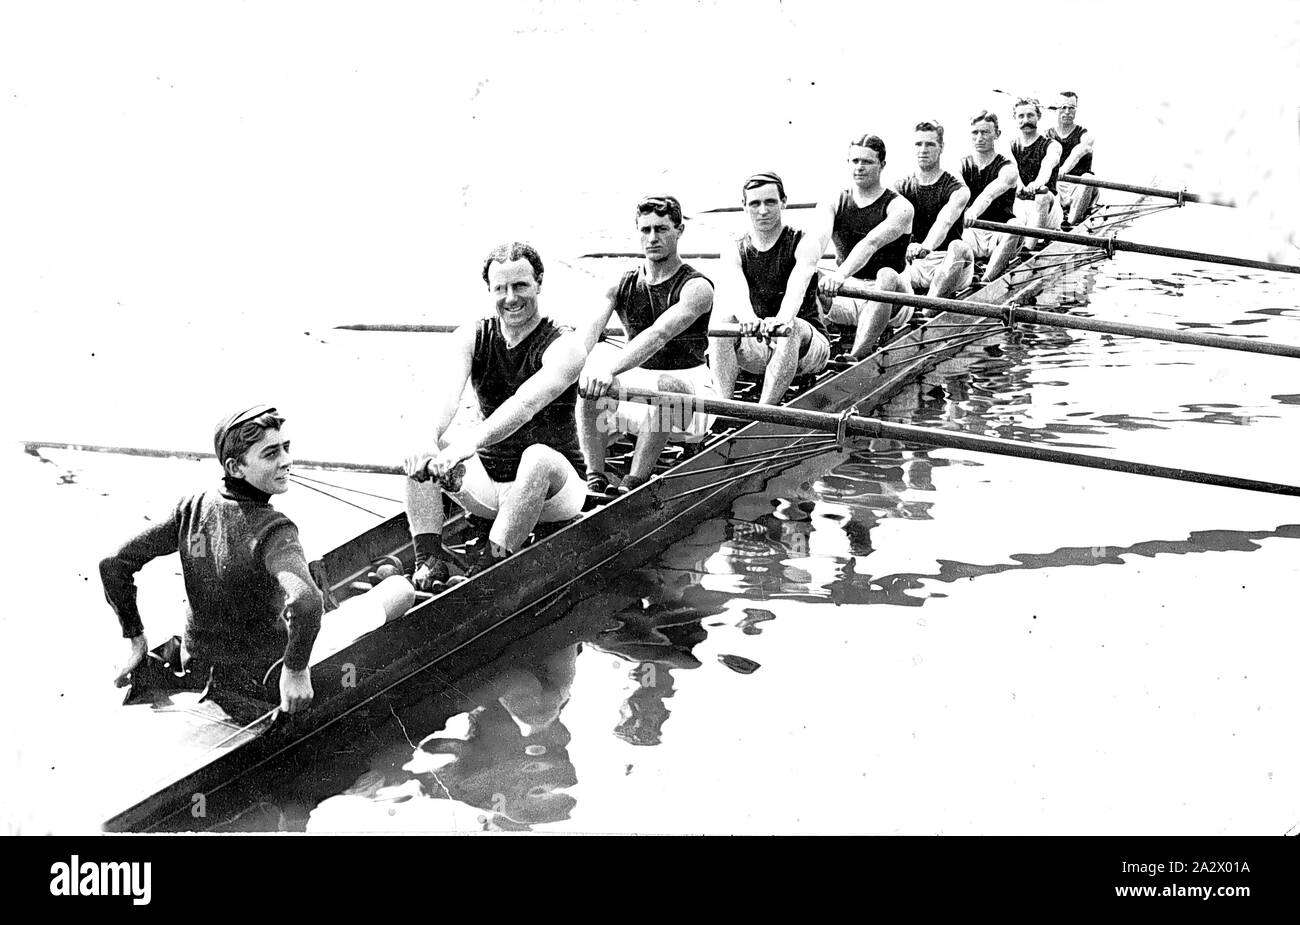 Negative - Bairnsdale District, Victoria, 1910, A rowing crew in a boat. Believed to be a double maiden eight, Bairnsdale & Sale, Easter, 1910 Stock Photo